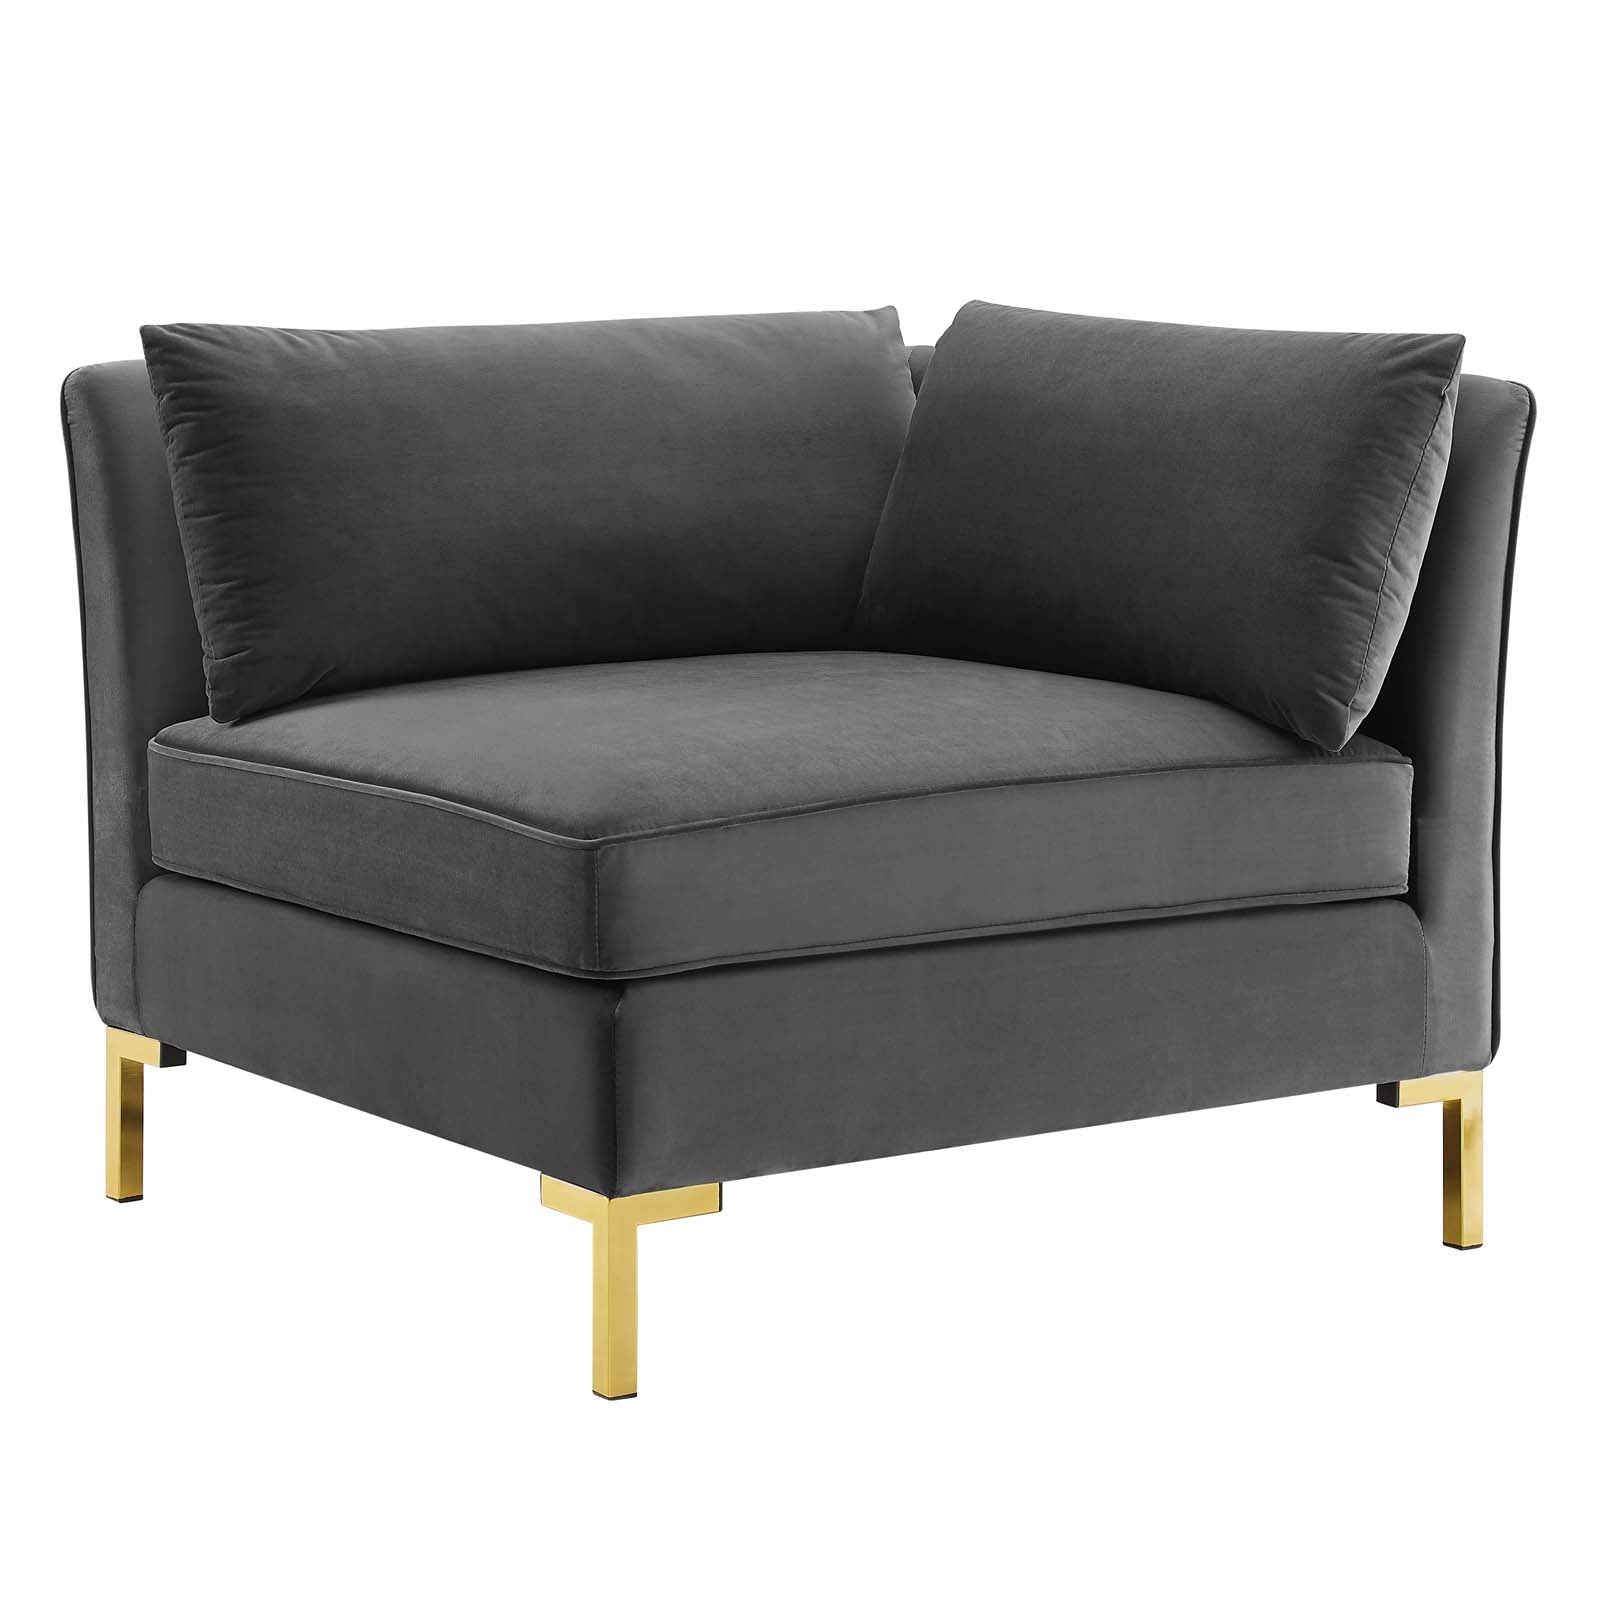 Modway Accent Chairs - Ardent Performance Velvet Sectional Sofa Corner Chair Gray